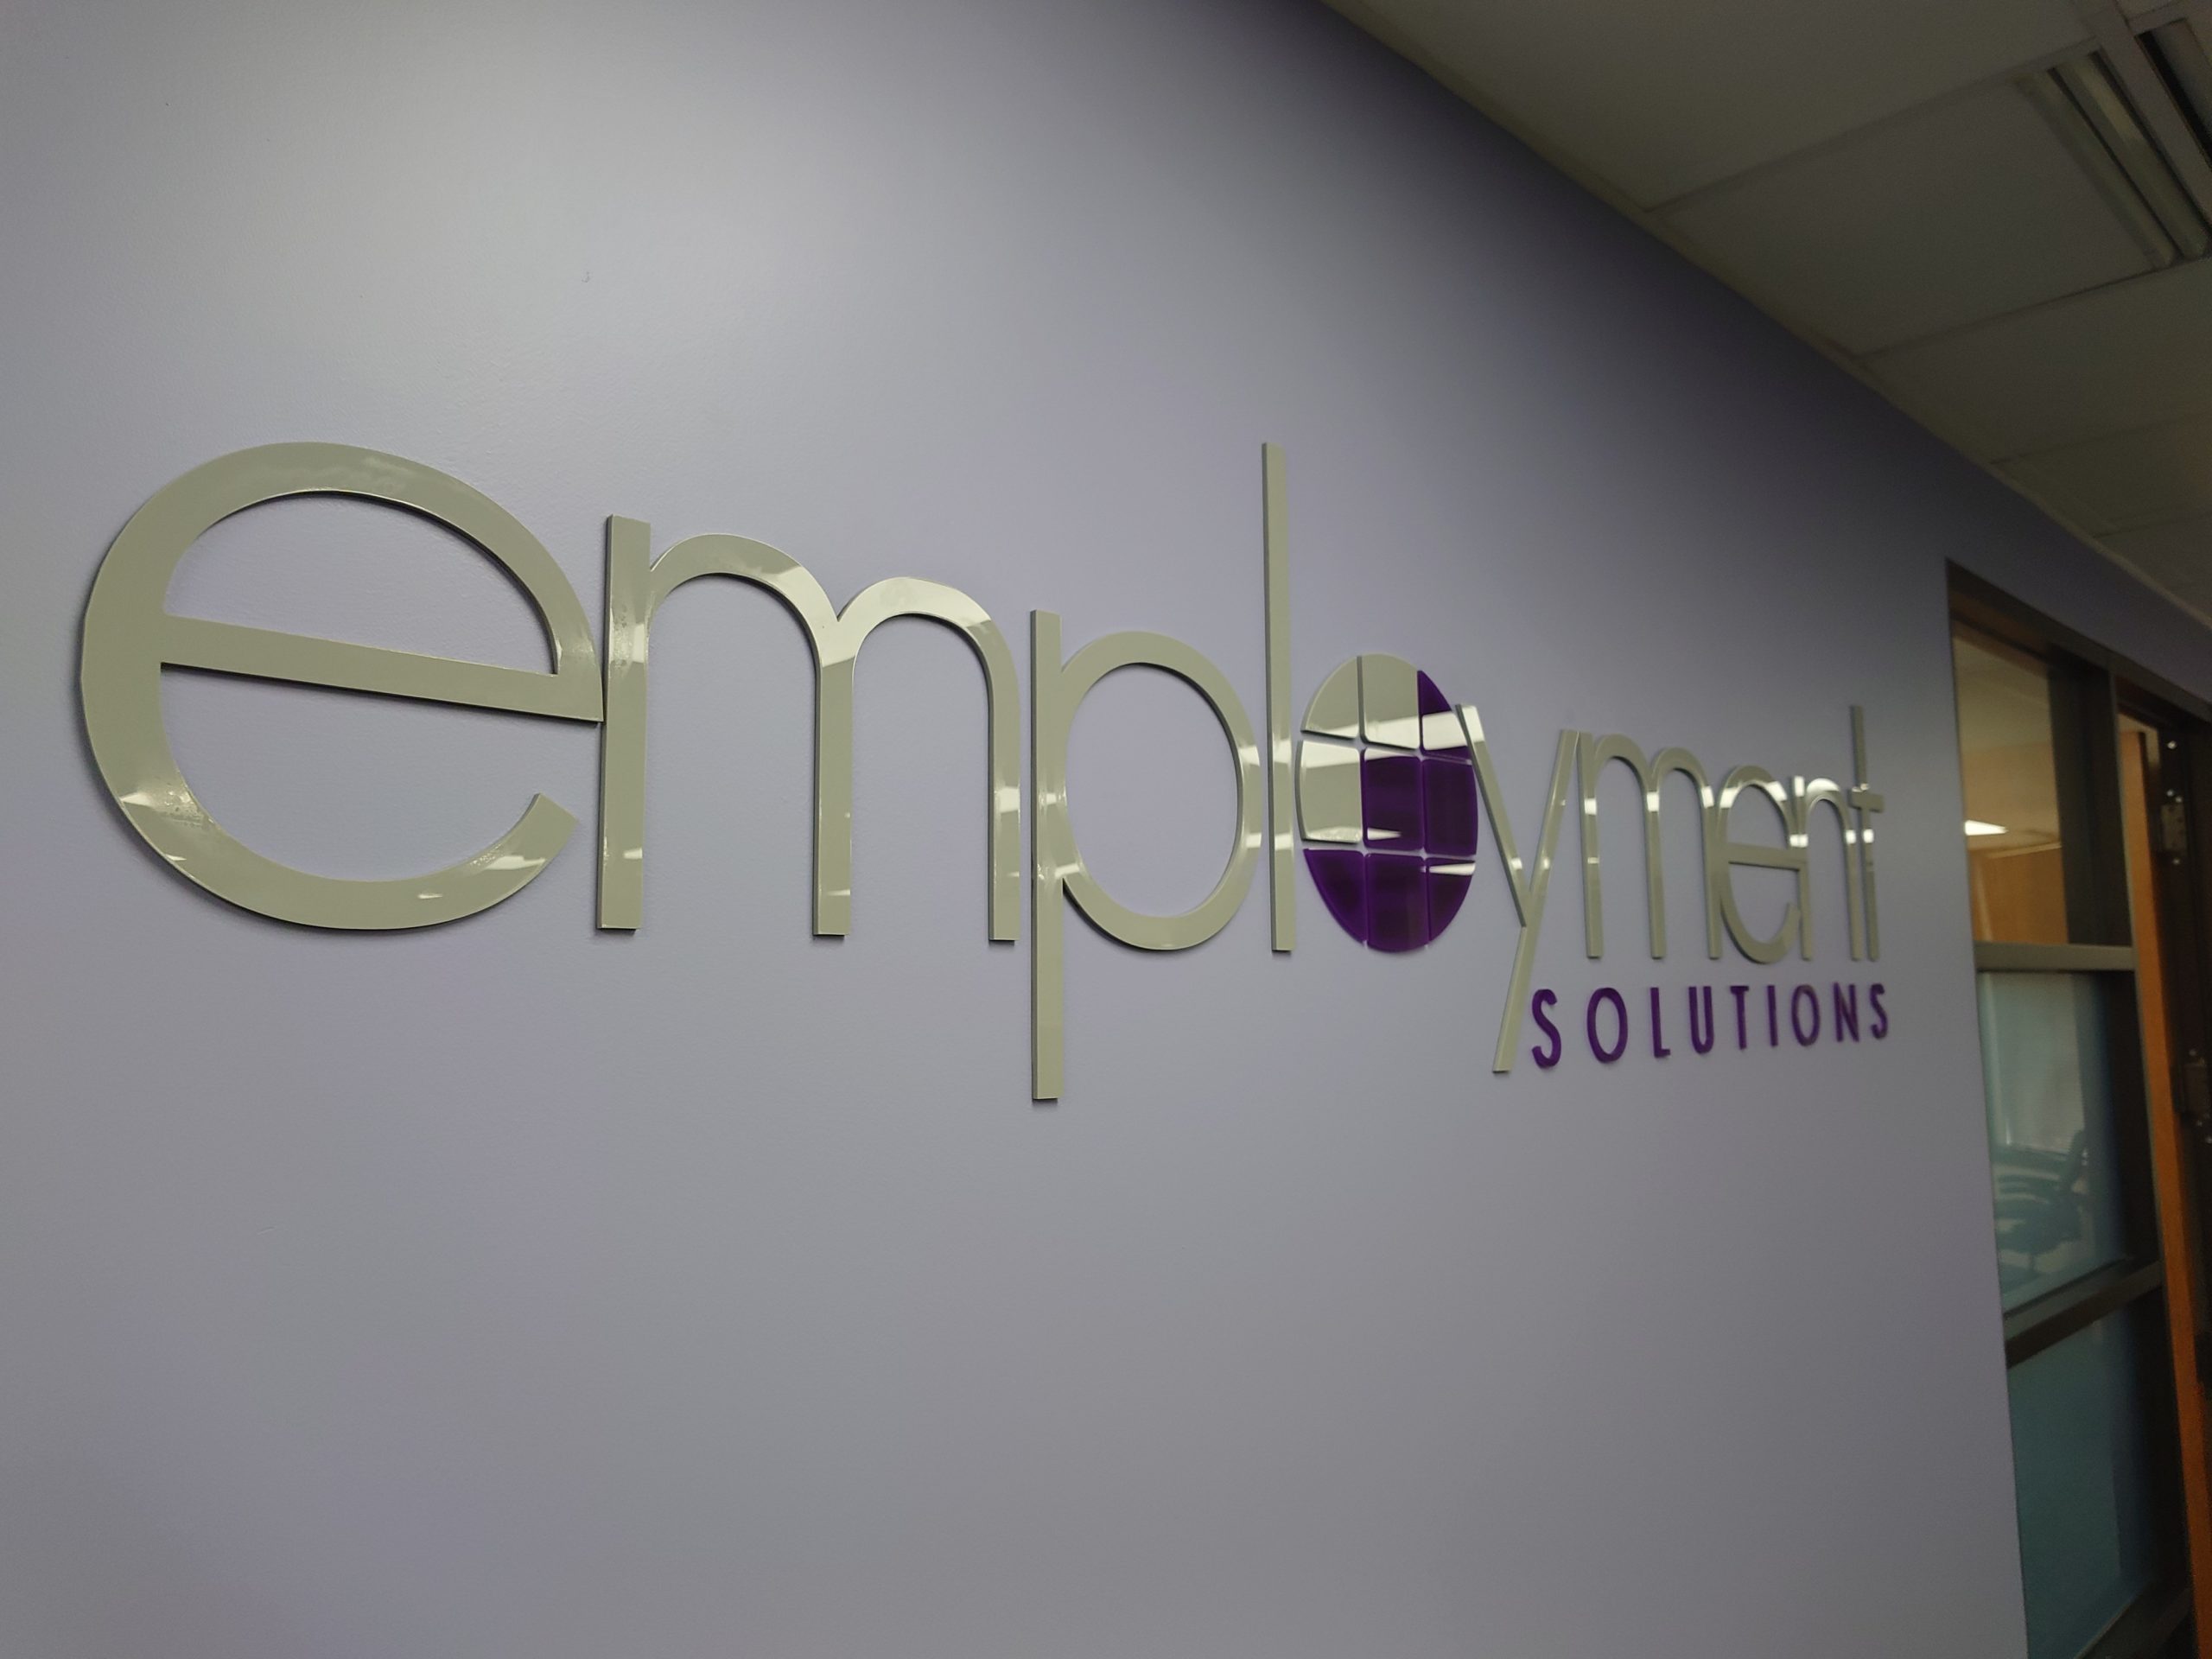 Employment Solutions Wall